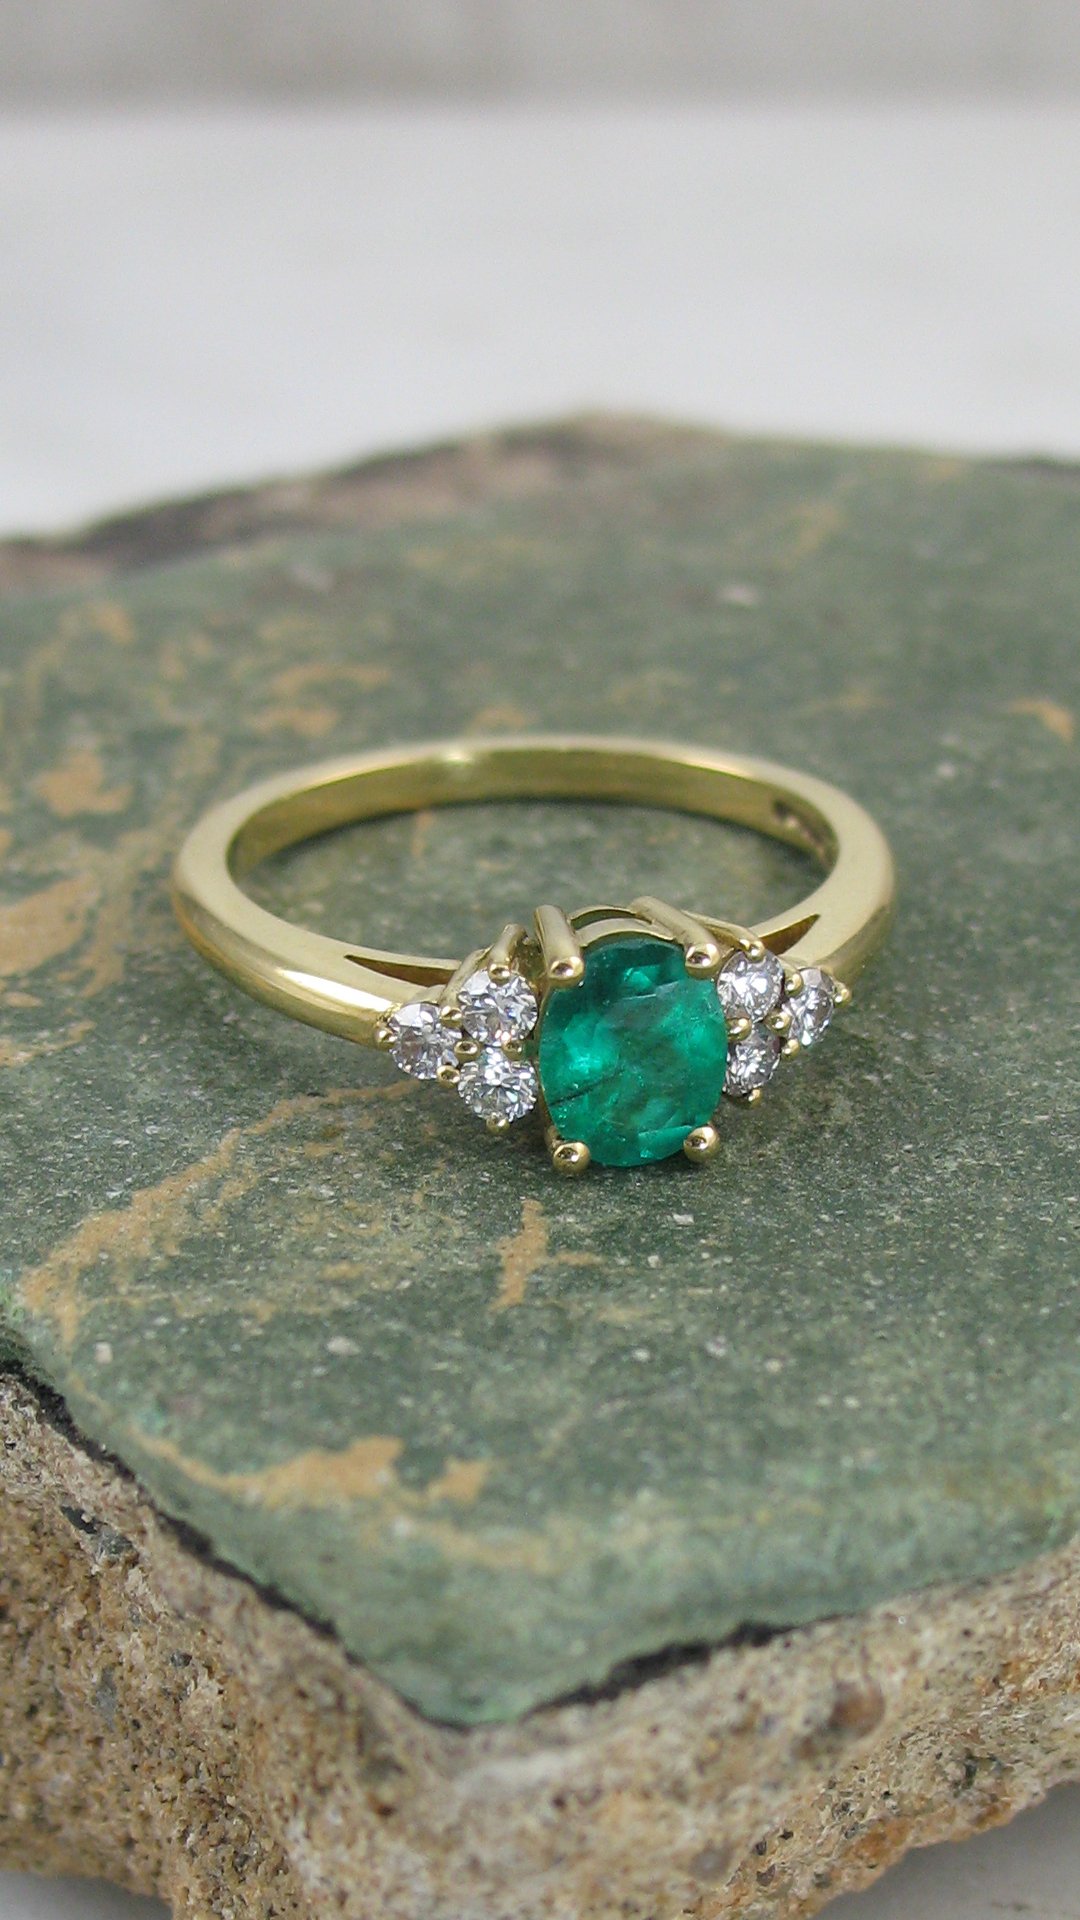 A bespoke emerald engagement ring with diamonds arranged in a trefoil design